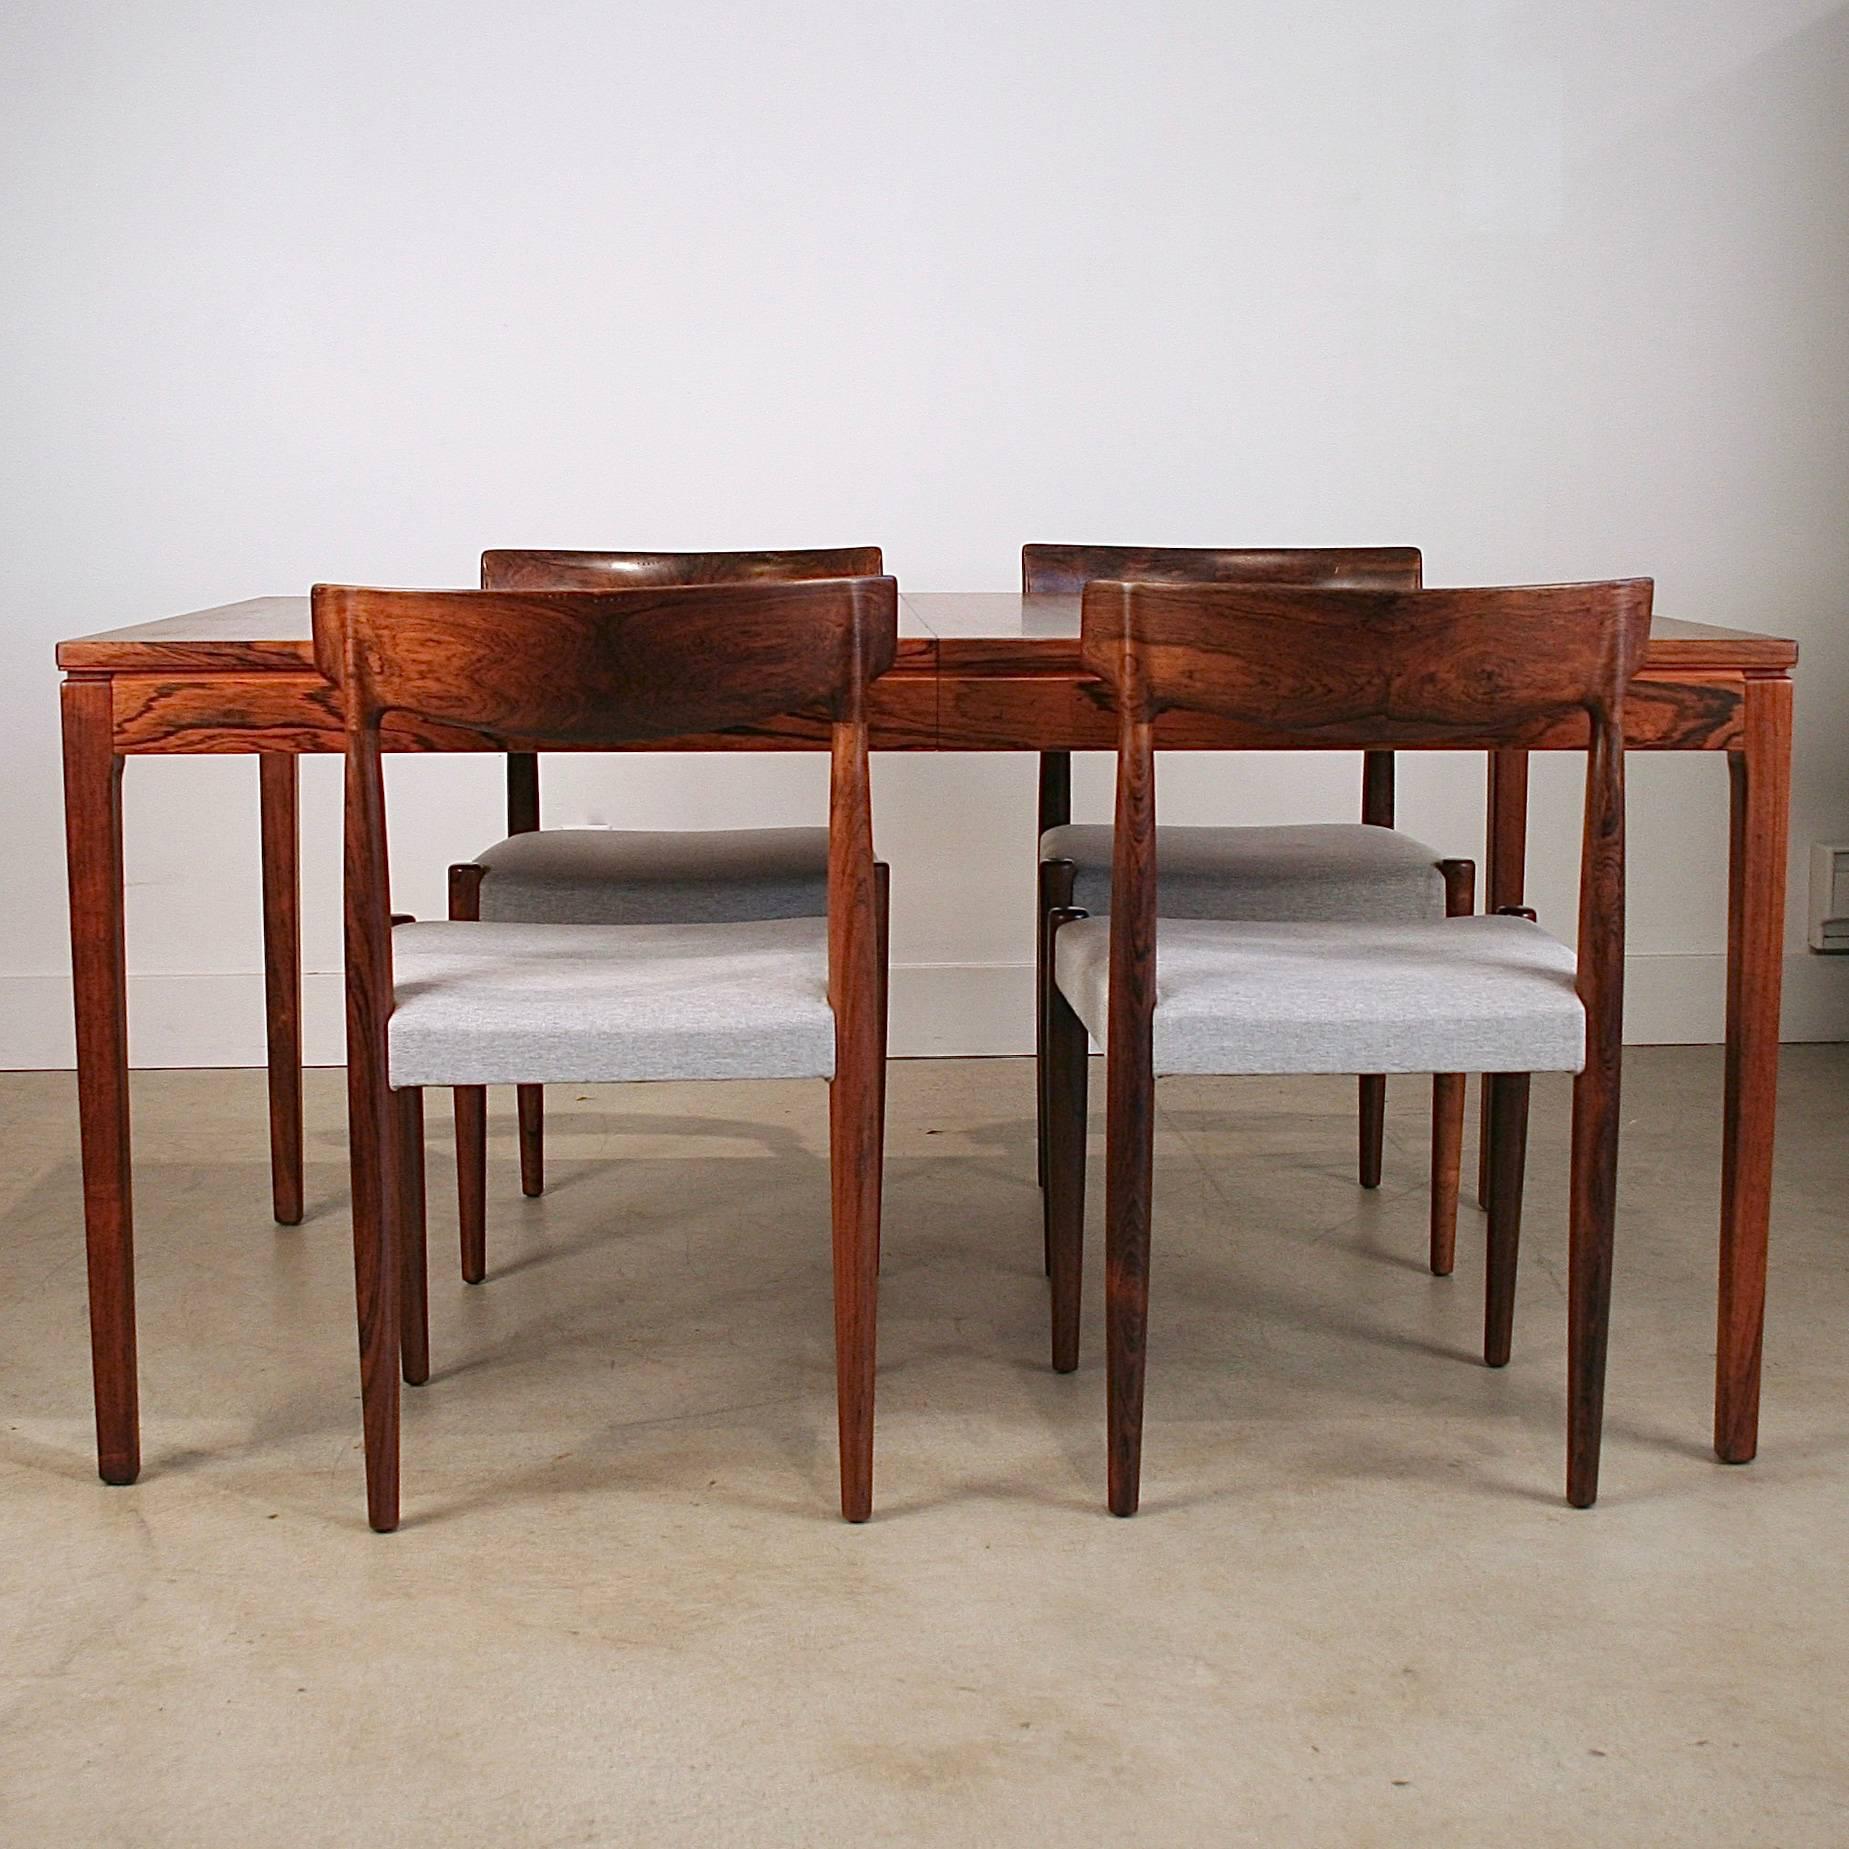 Mid-20th Century Set of Four Vintage Danish Rosewood Dining Chairs by Knud Faerch For Sale